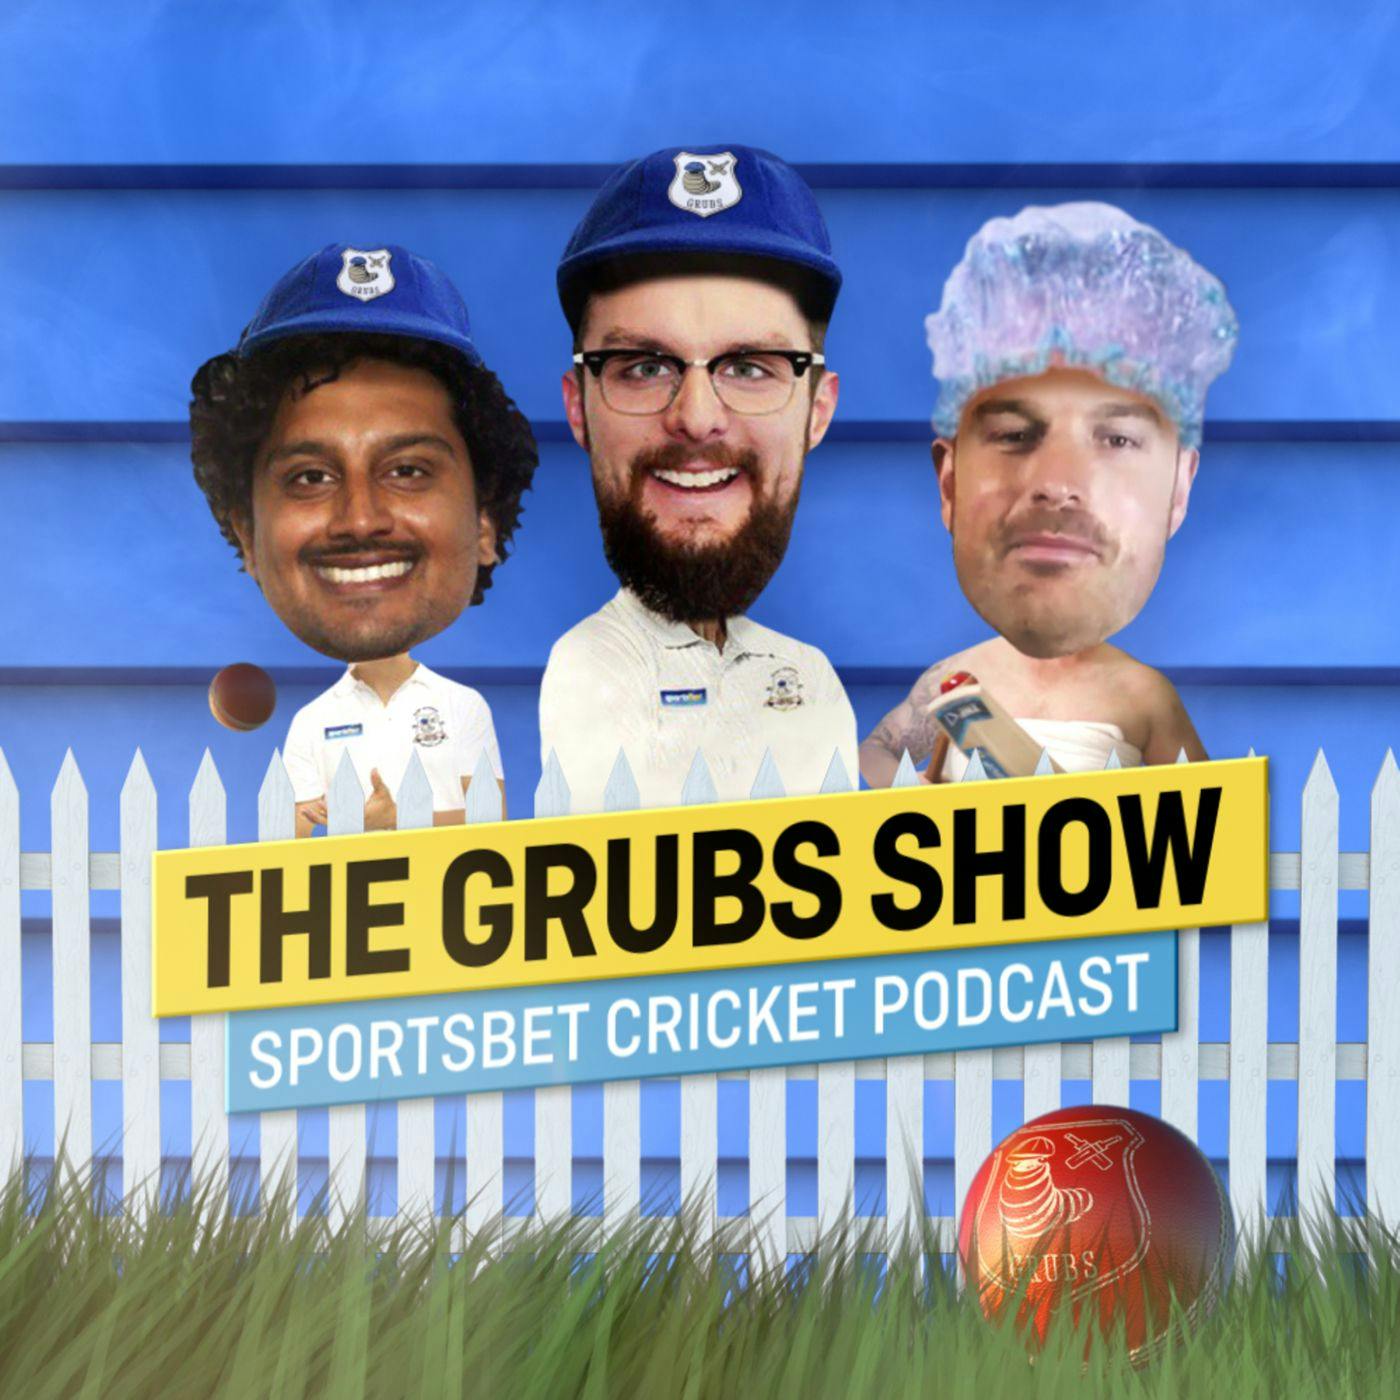 S2 Ep 14 - The Grubs Open a Pub ’The Slog To Cow’